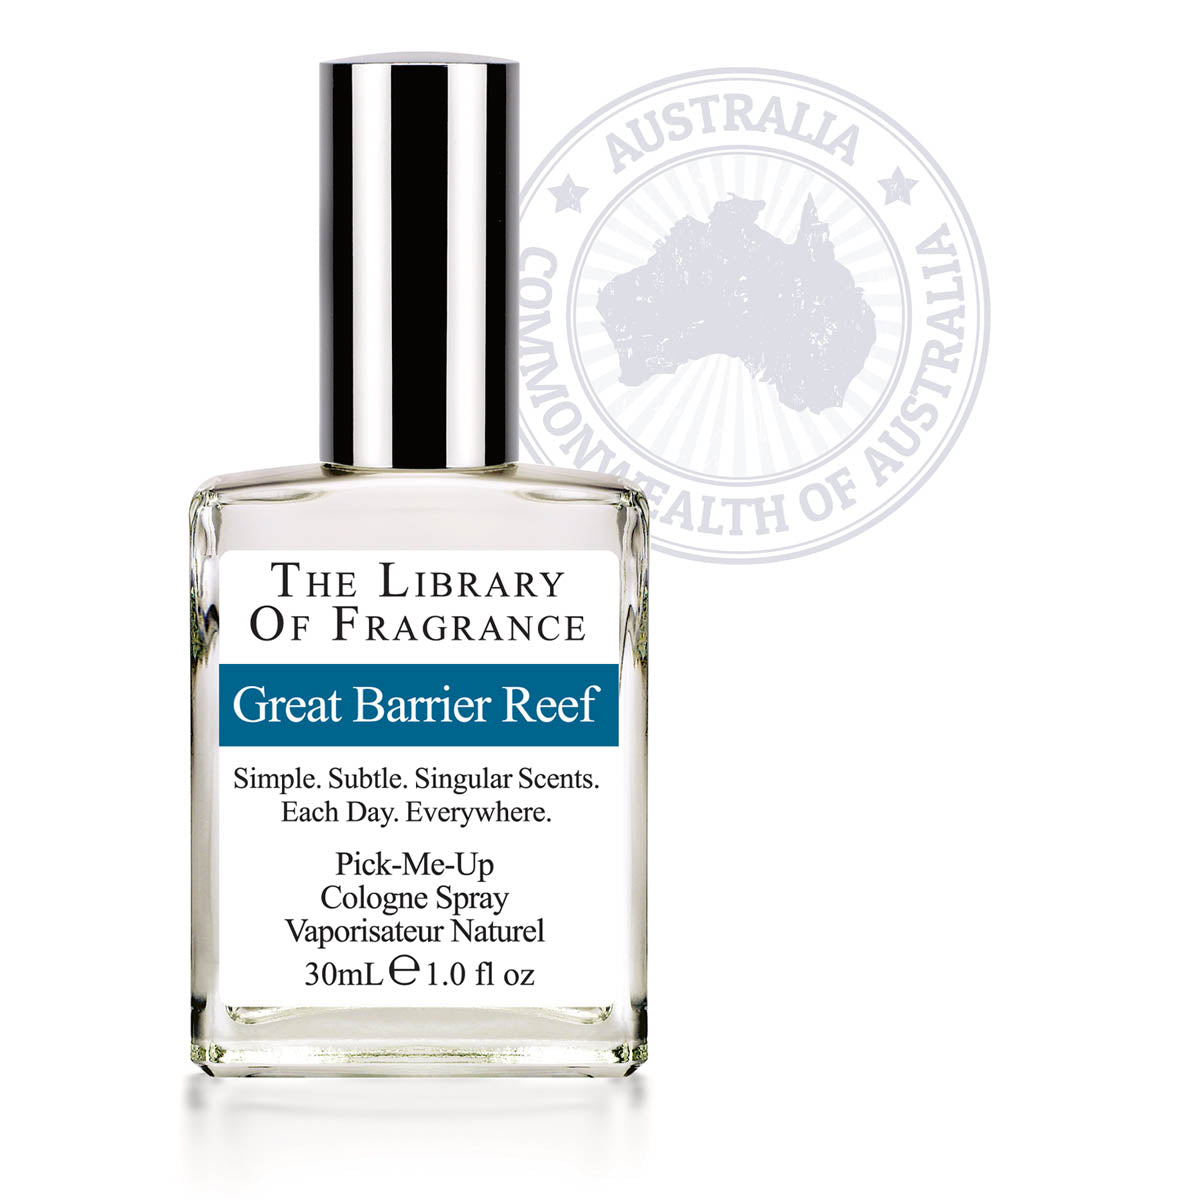 The Library Of Fragrance Great Barrier Reef 30ml Cologne AKA Demeter Fragrance